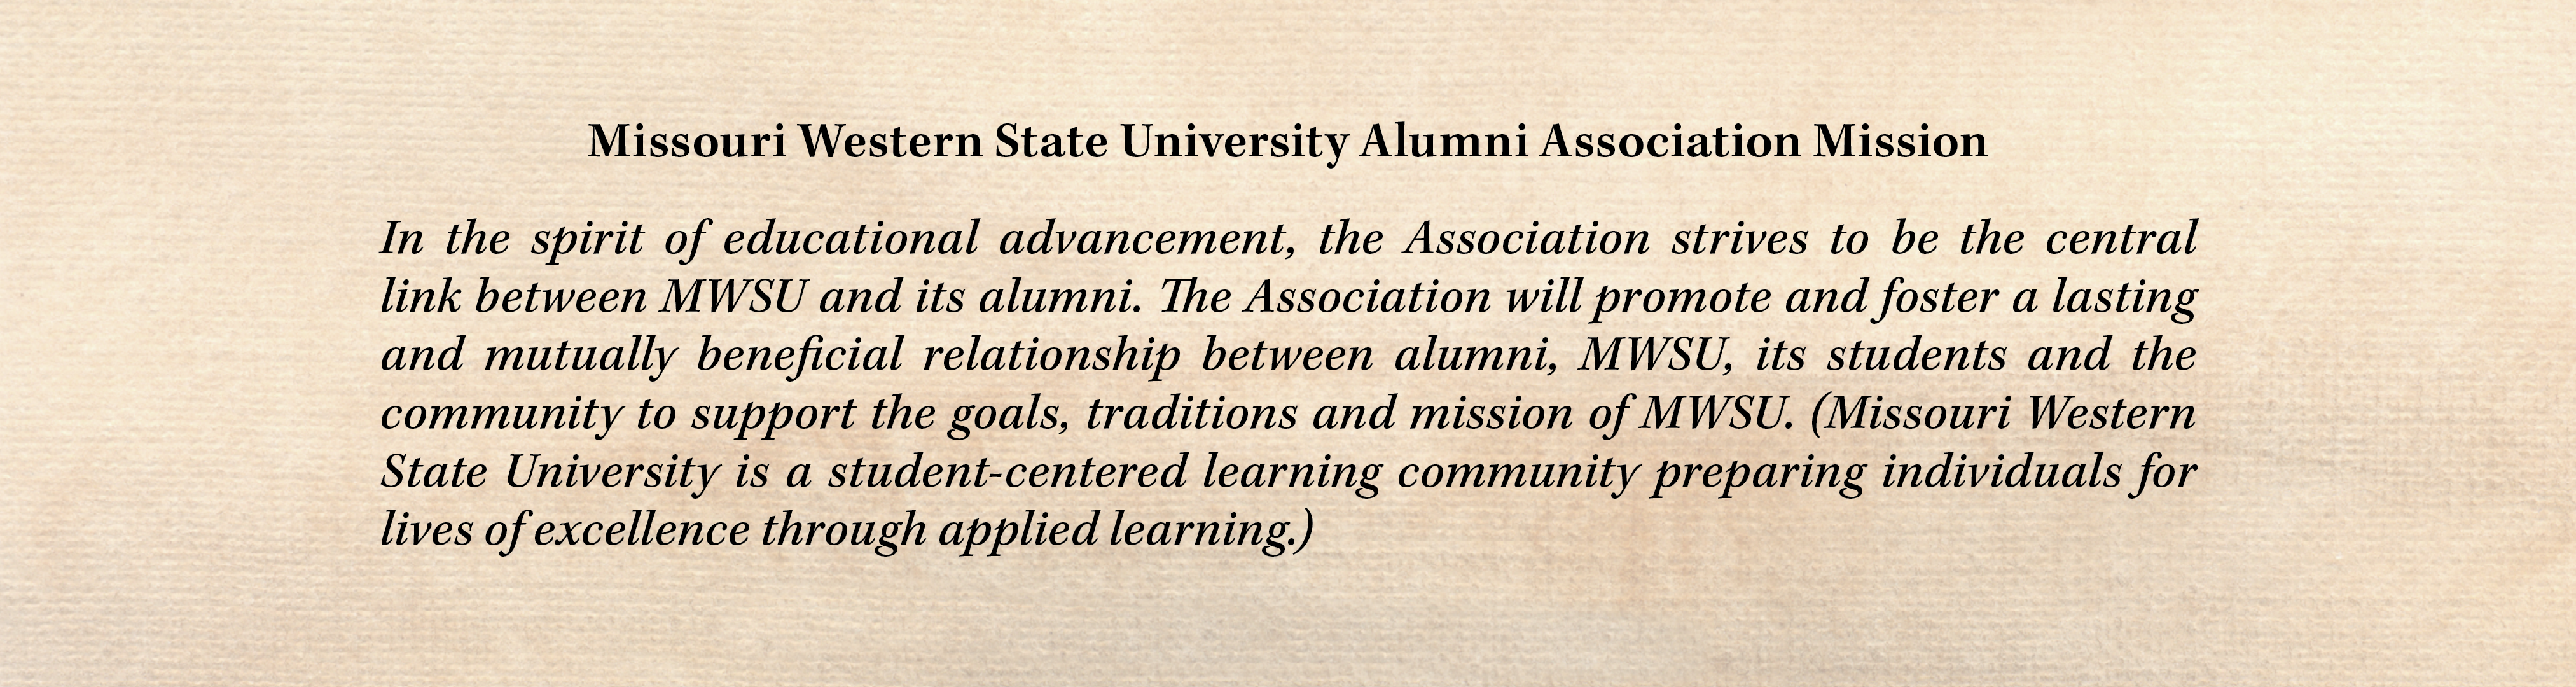 Missouri Western State University Alumni Association Mission In the spirit of educational advancement, the Association strives to be the central link between MWSU and its alumni. The Association will promote and foster a lasting and mutually beneficial relationship between alumni, MWSU, its students and the community to support the goals, traditions and mission of MWSU.(Missouri Western State University is a student-centered learning community preparing individuals for lives of excellence through applied learning.)